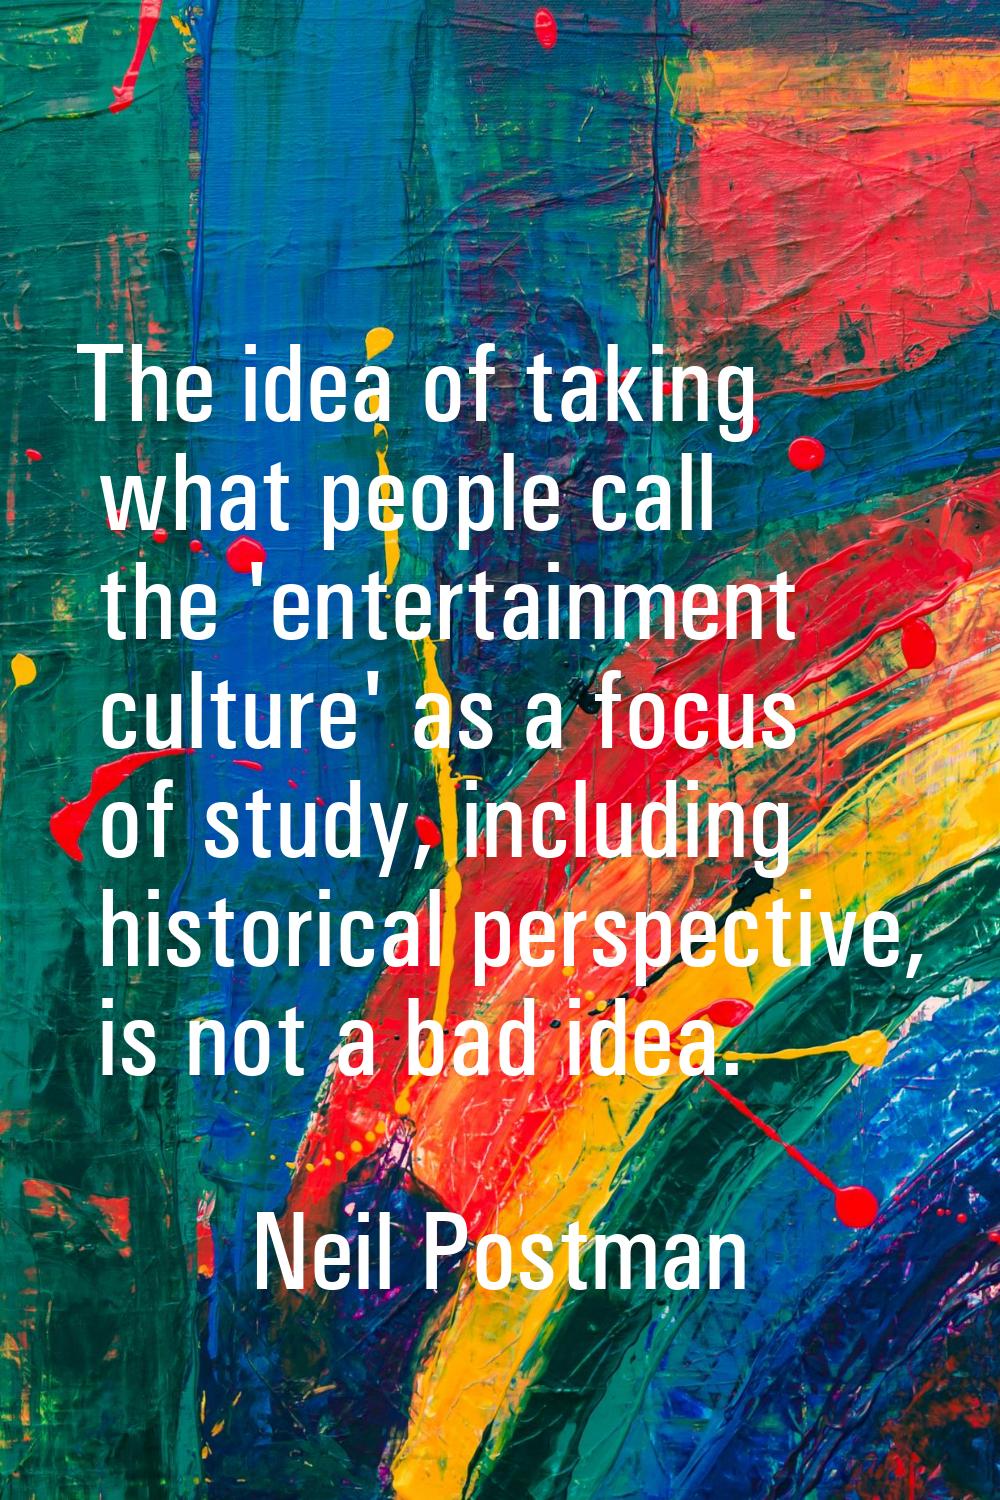 The idea of taking what people call the 'entertainment culture' as a focus of study, including hist